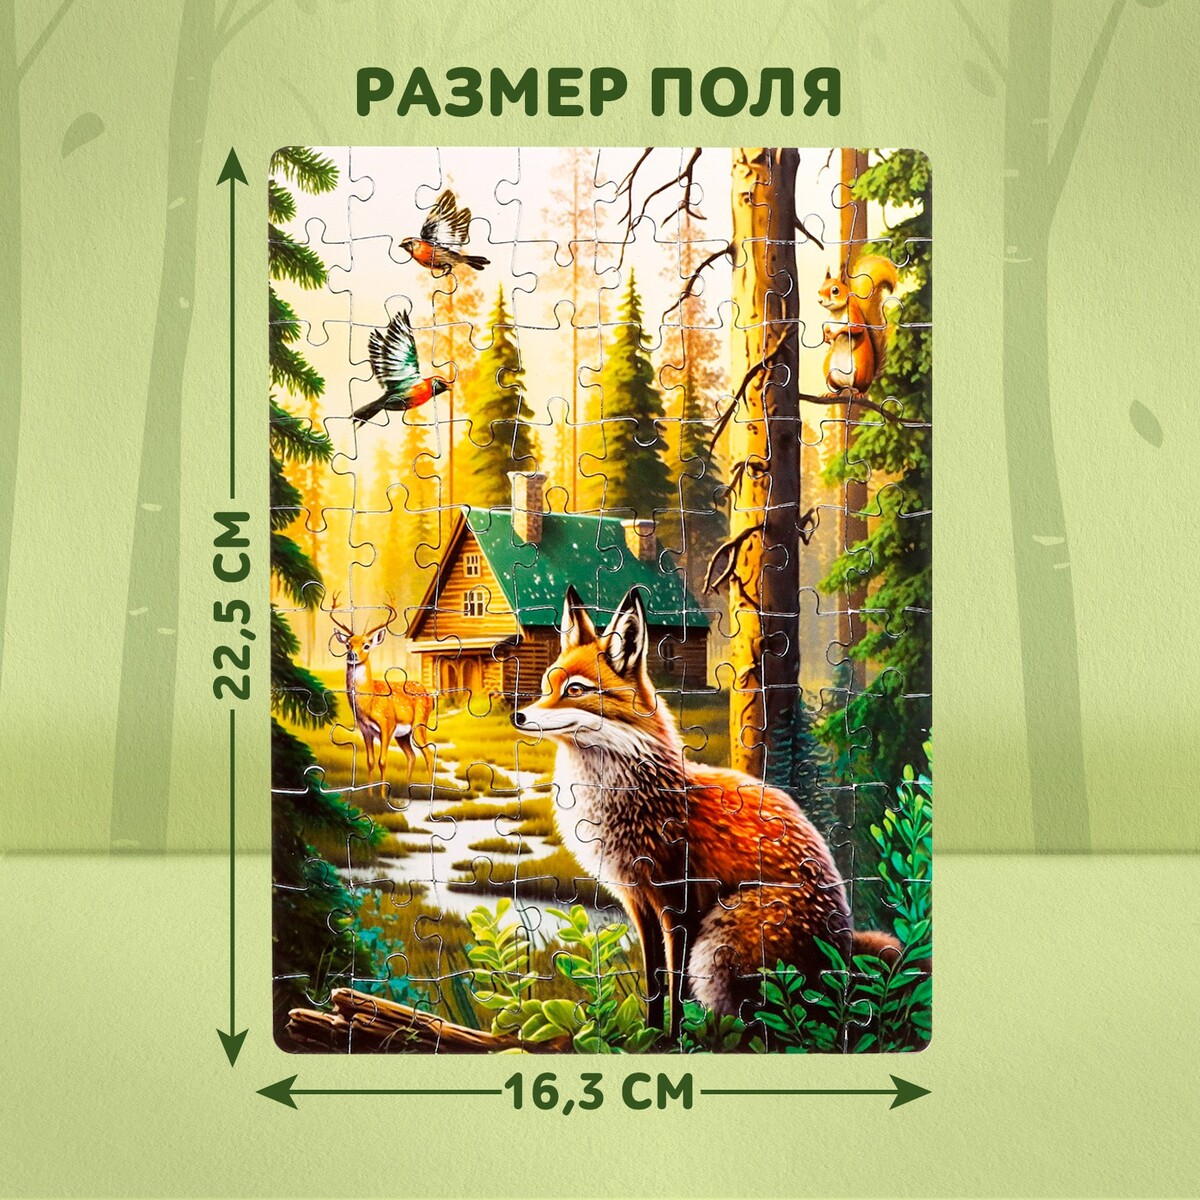 фото Пазл puzzle time